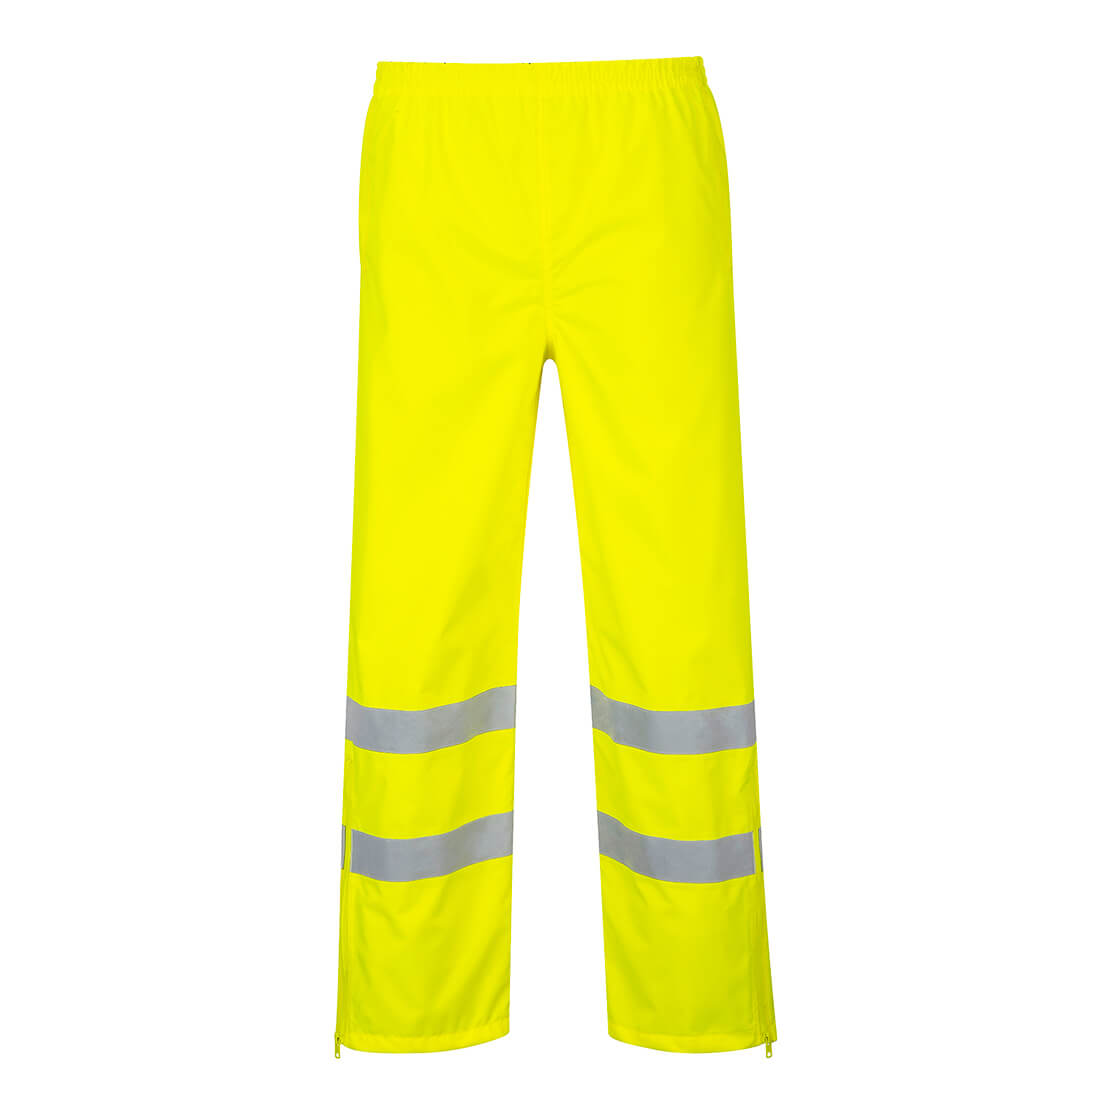 Image of Oxford Weave 300D Class 1 Breathable Hi Vis Breathable Trousers Yellow XL